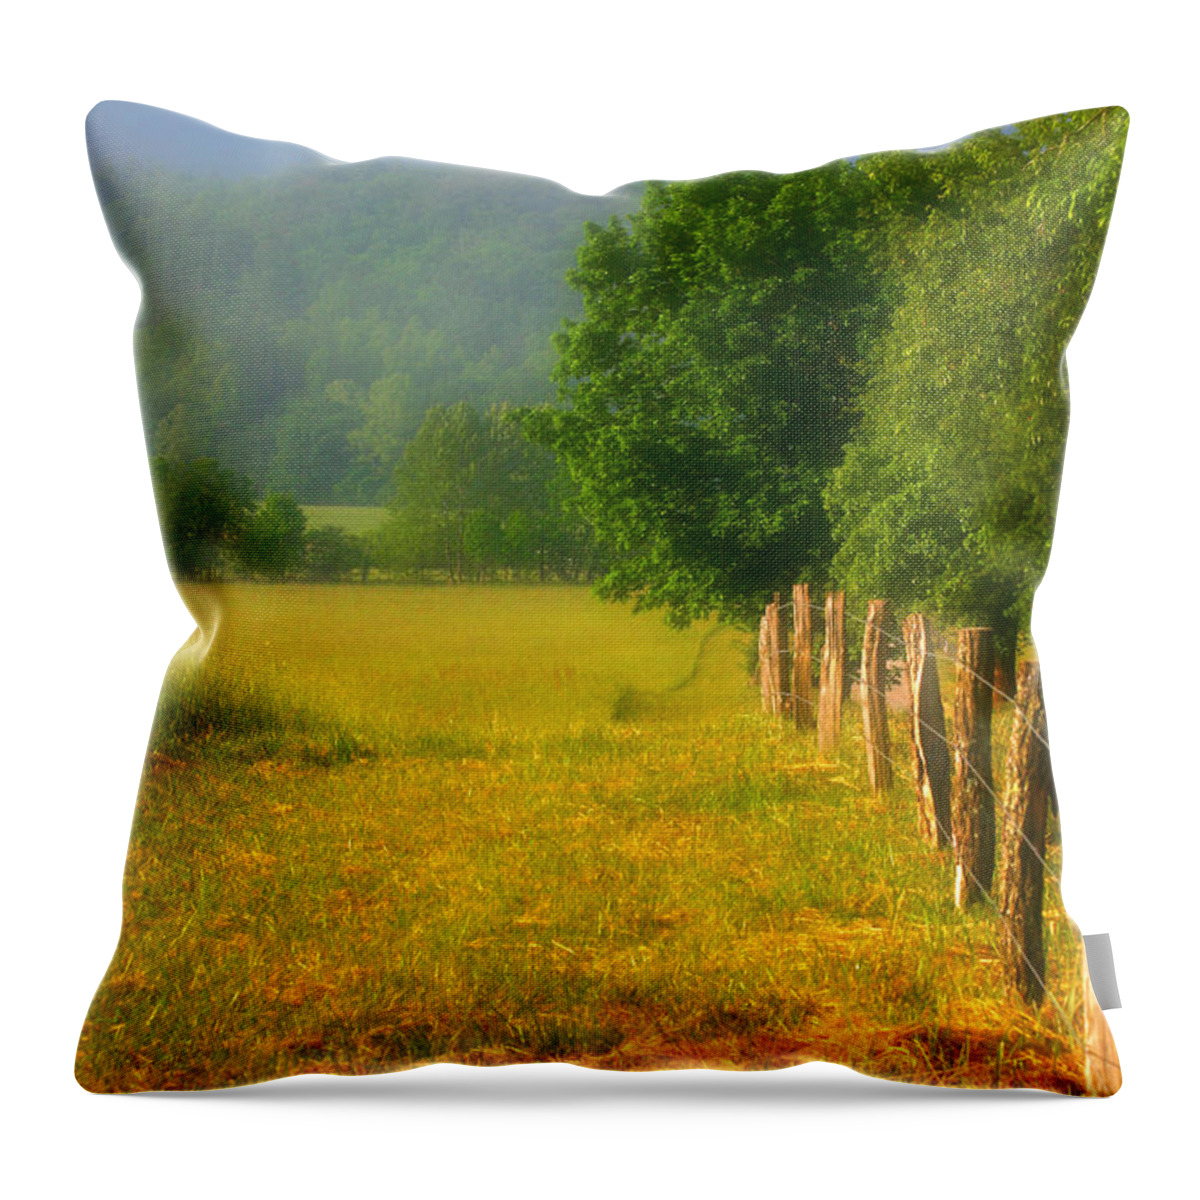 Country Throw Pillow featuring the photograph Smoky Mountains Cades Cove by Cindy Haggerty